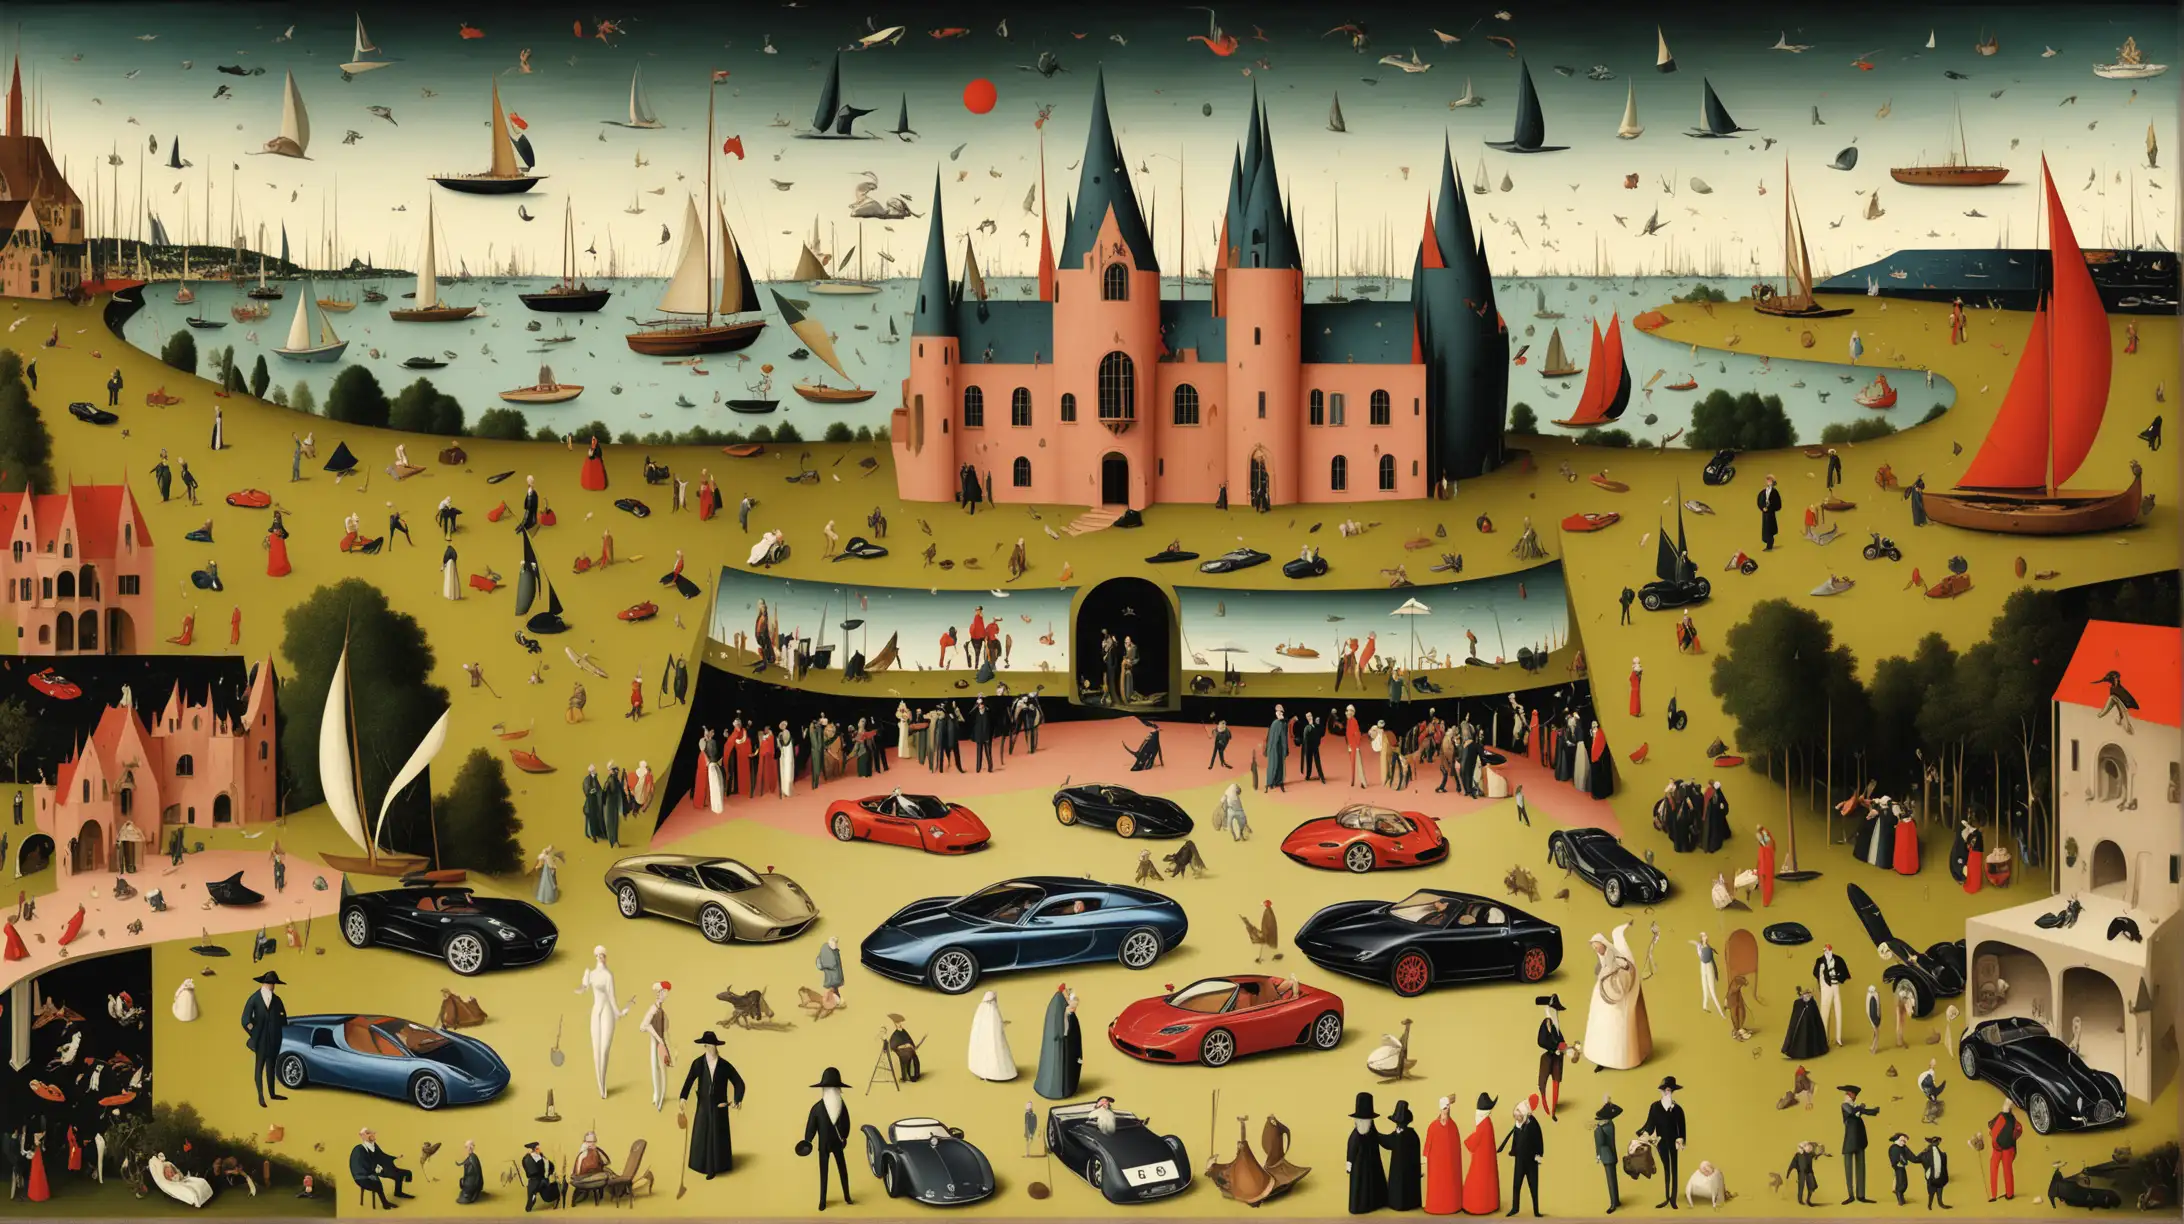 art collector Include luxurious items such as sports cars, yachts, or mansions in the background hinting at his extravagant lifestyle. illustrated in the style of Hieronymus Bosch